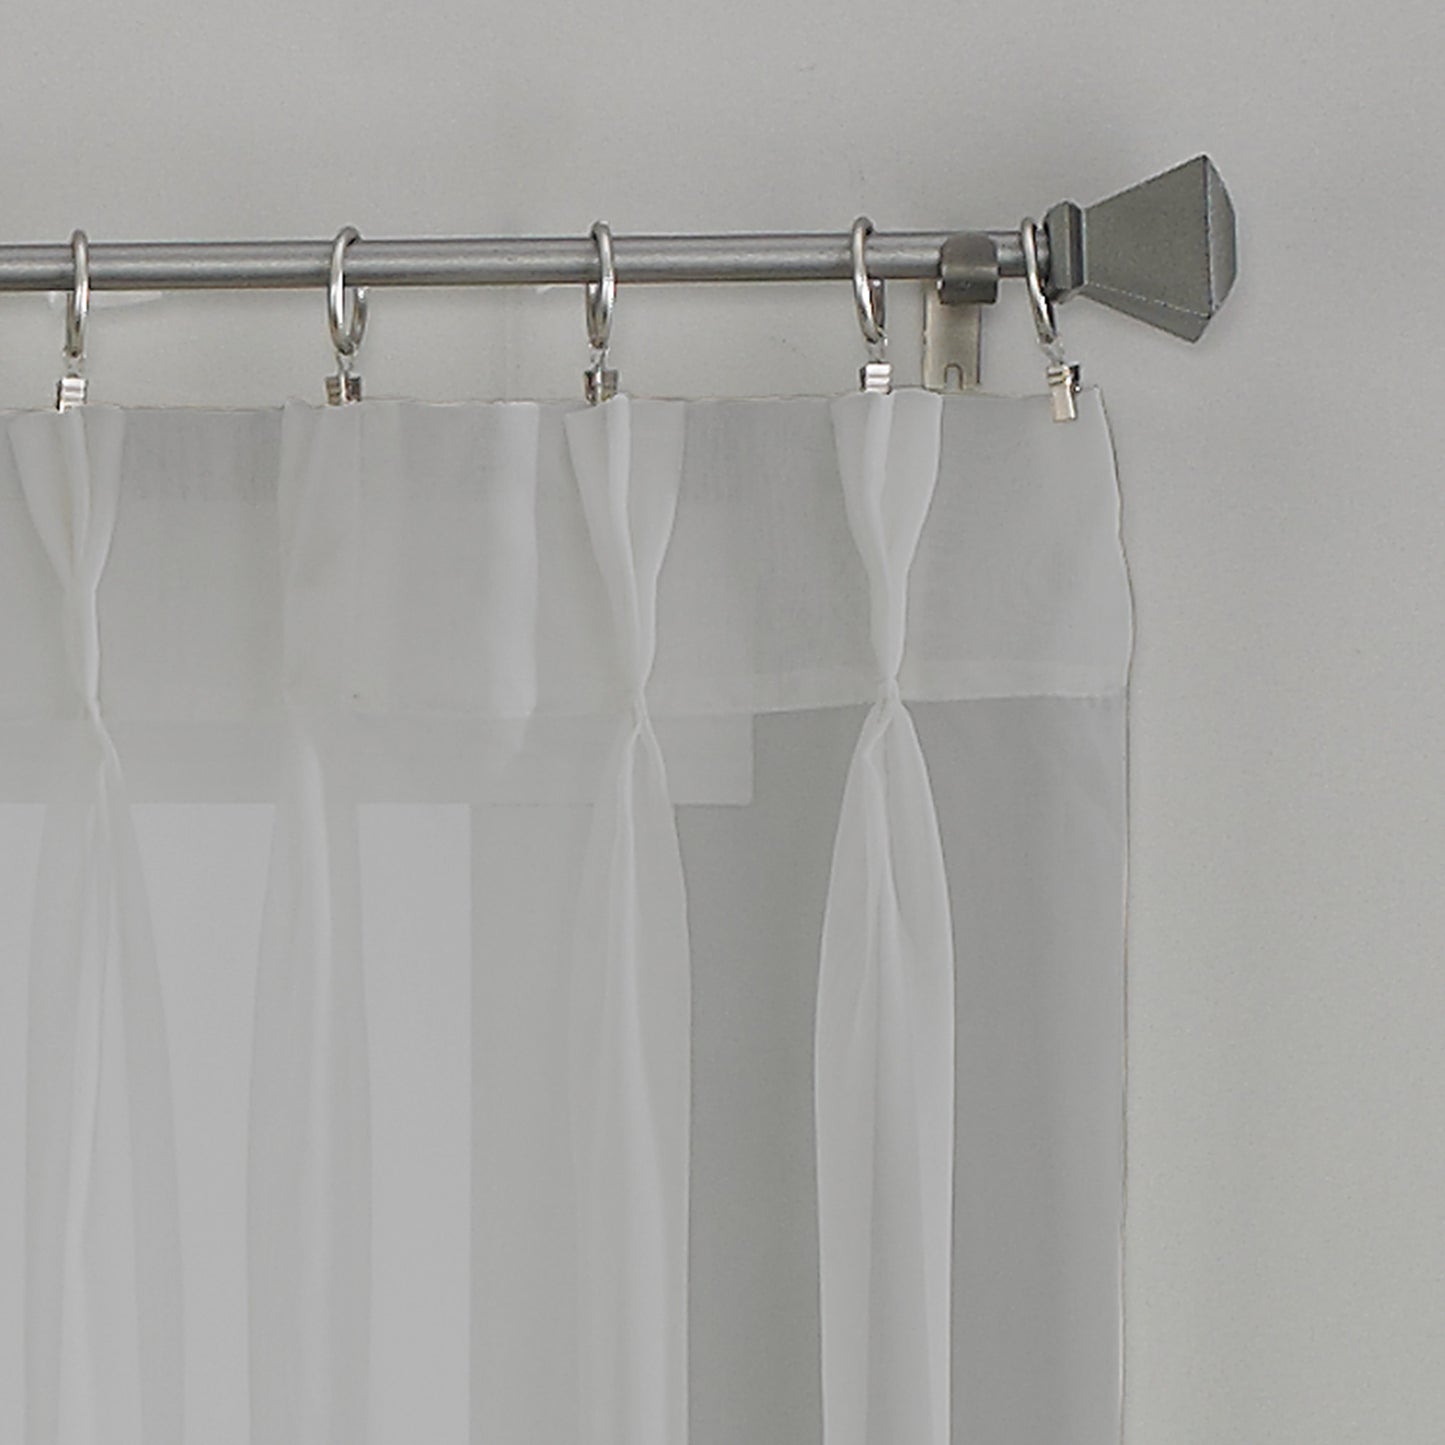 Curtainworks Soho Voile Pinch Pleat Window Curtain Panel Oyster